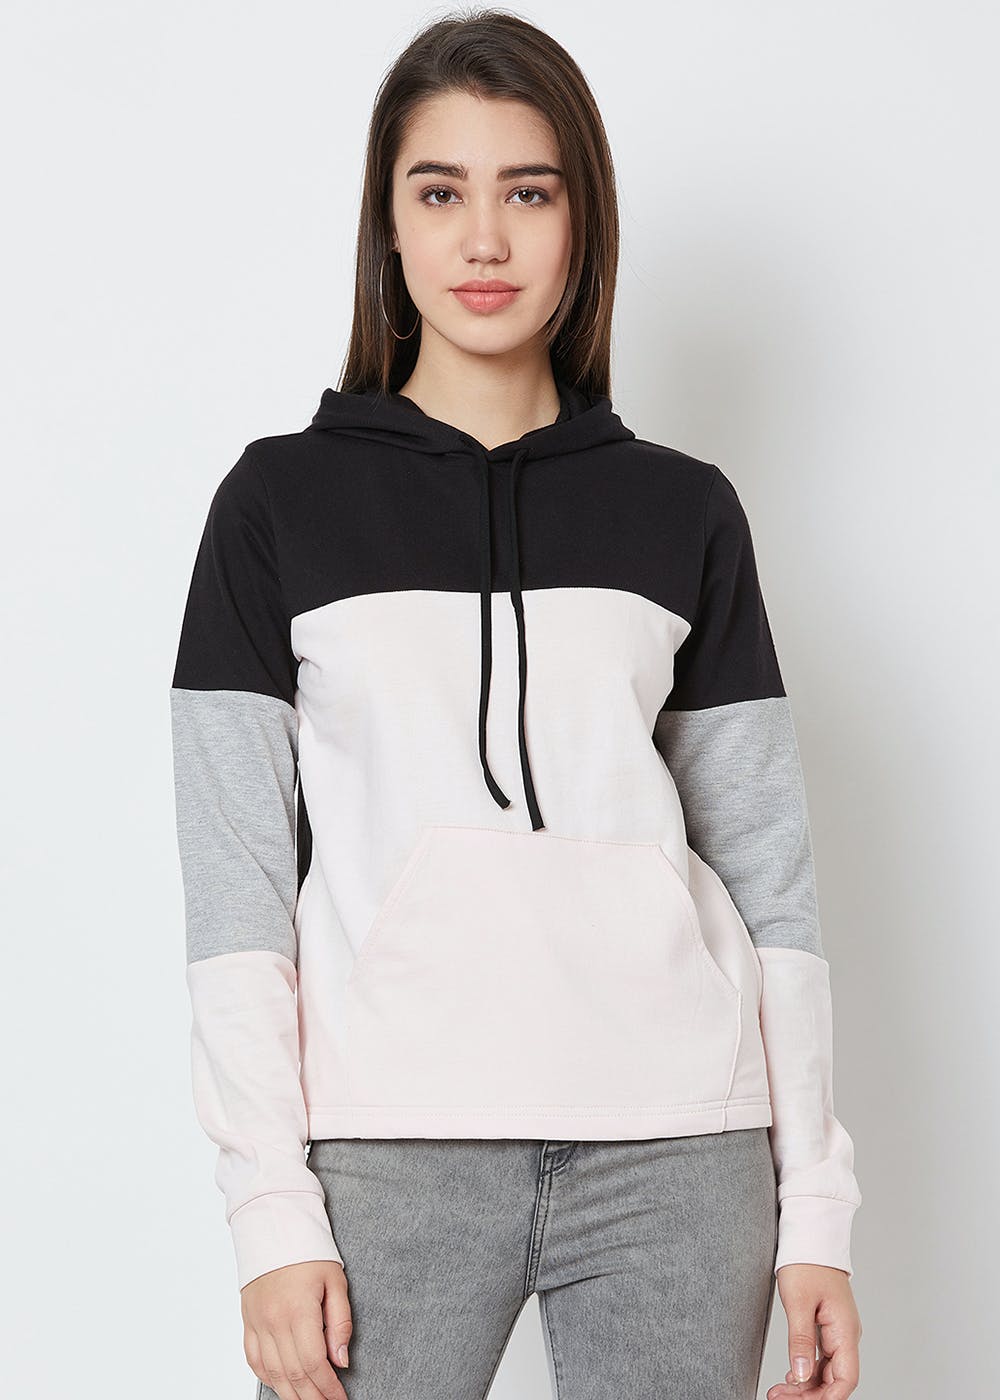 Get Colourblocked Sleeves Detail Cotton Fleece Hoodie at ₹ 898 | LBB Shop